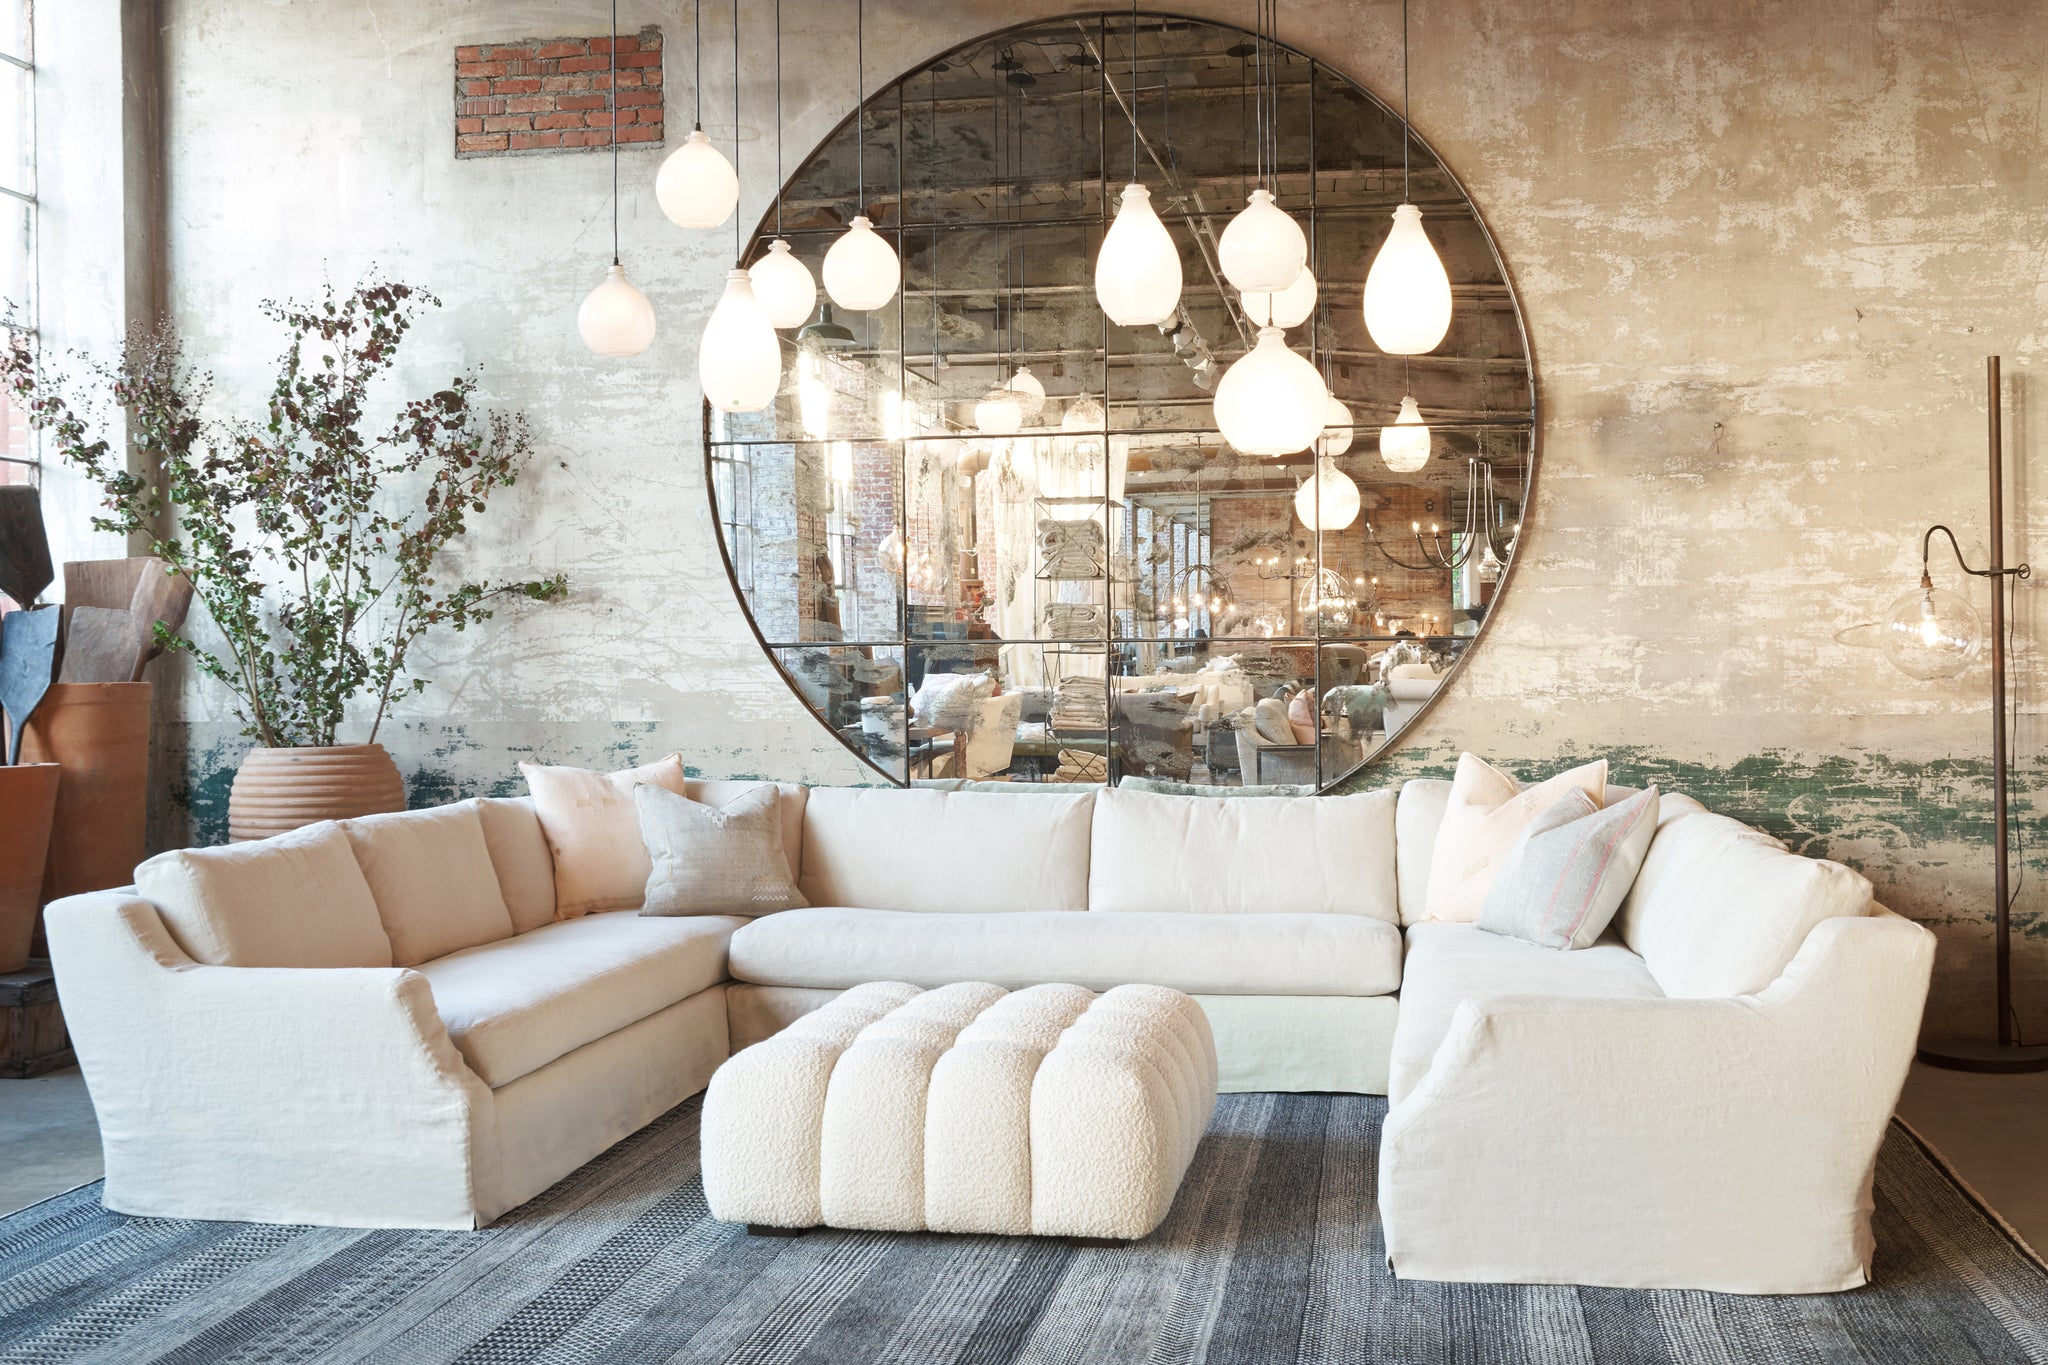  Large 3 piece sectional in front of a round mirror. A cream colored ottoman is in the middle. There are white glass light pendants hanging above. Photographed in Wooly White. 